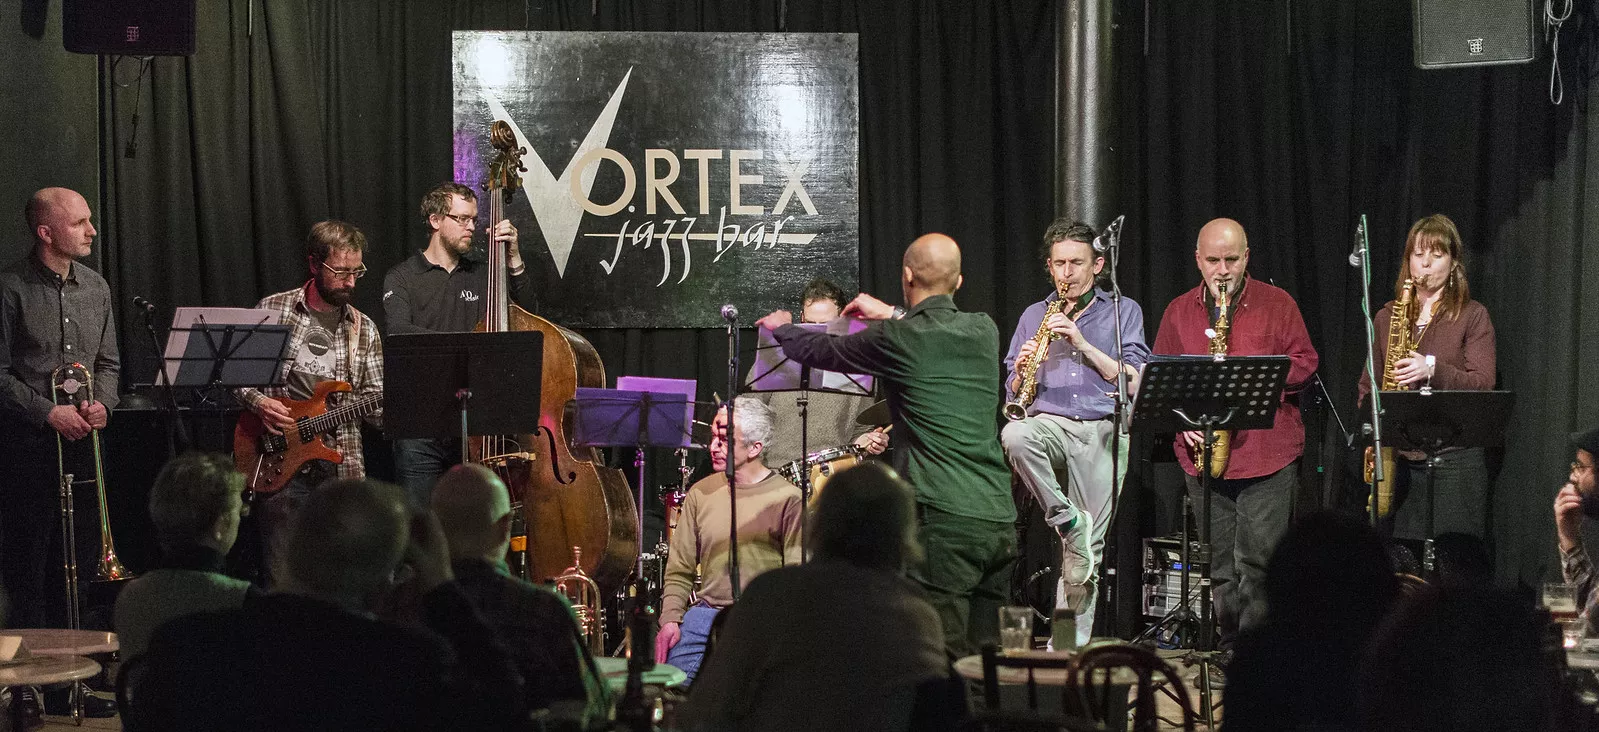 The Vortex Jazz Club in United Kingdom, Europe | Live Music Venues - Rated 3.6